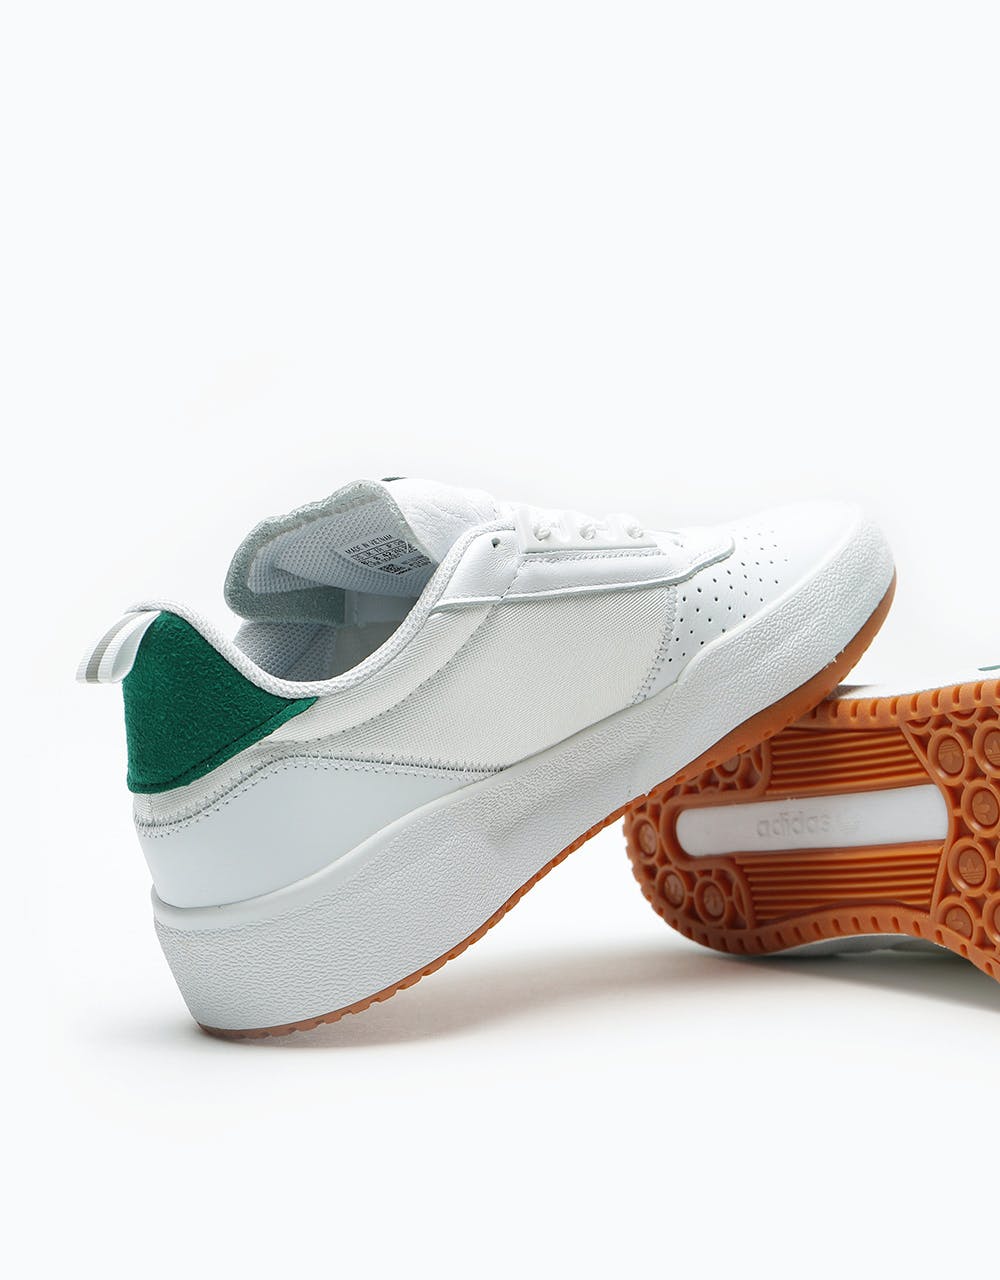 Adidas Liberty Cup Skate Shoes - White/Collegiate Green/Clear Brown